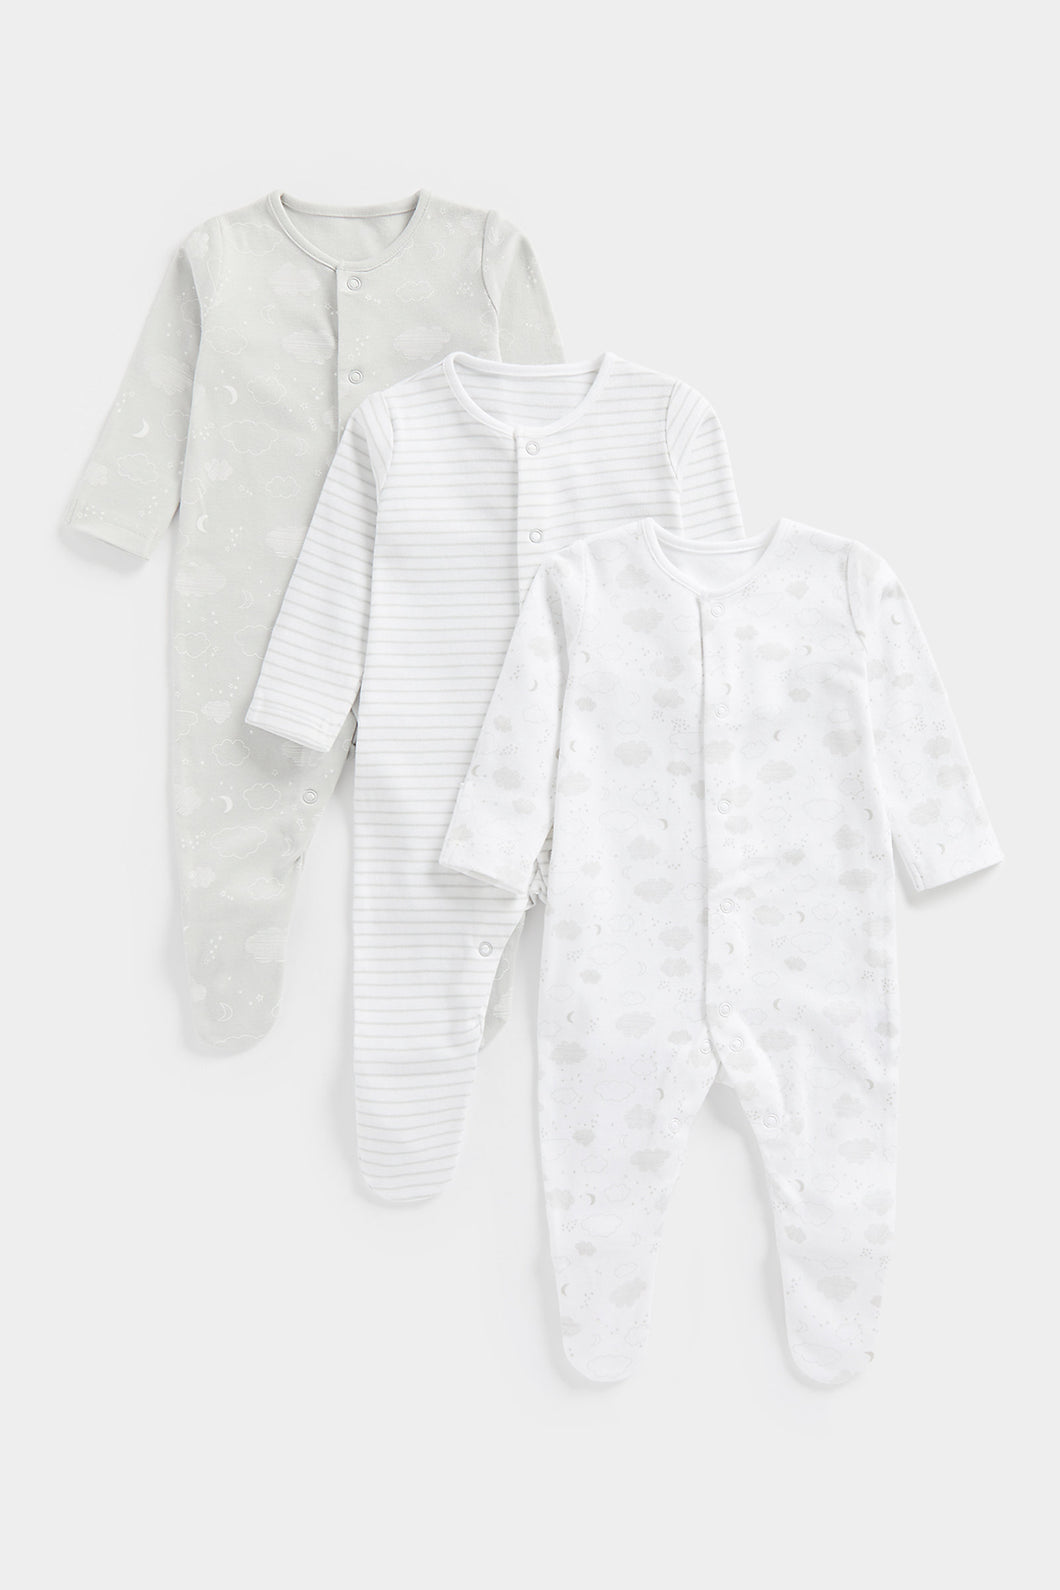 Mothercare Grey Sleepsuits - 3 Pack